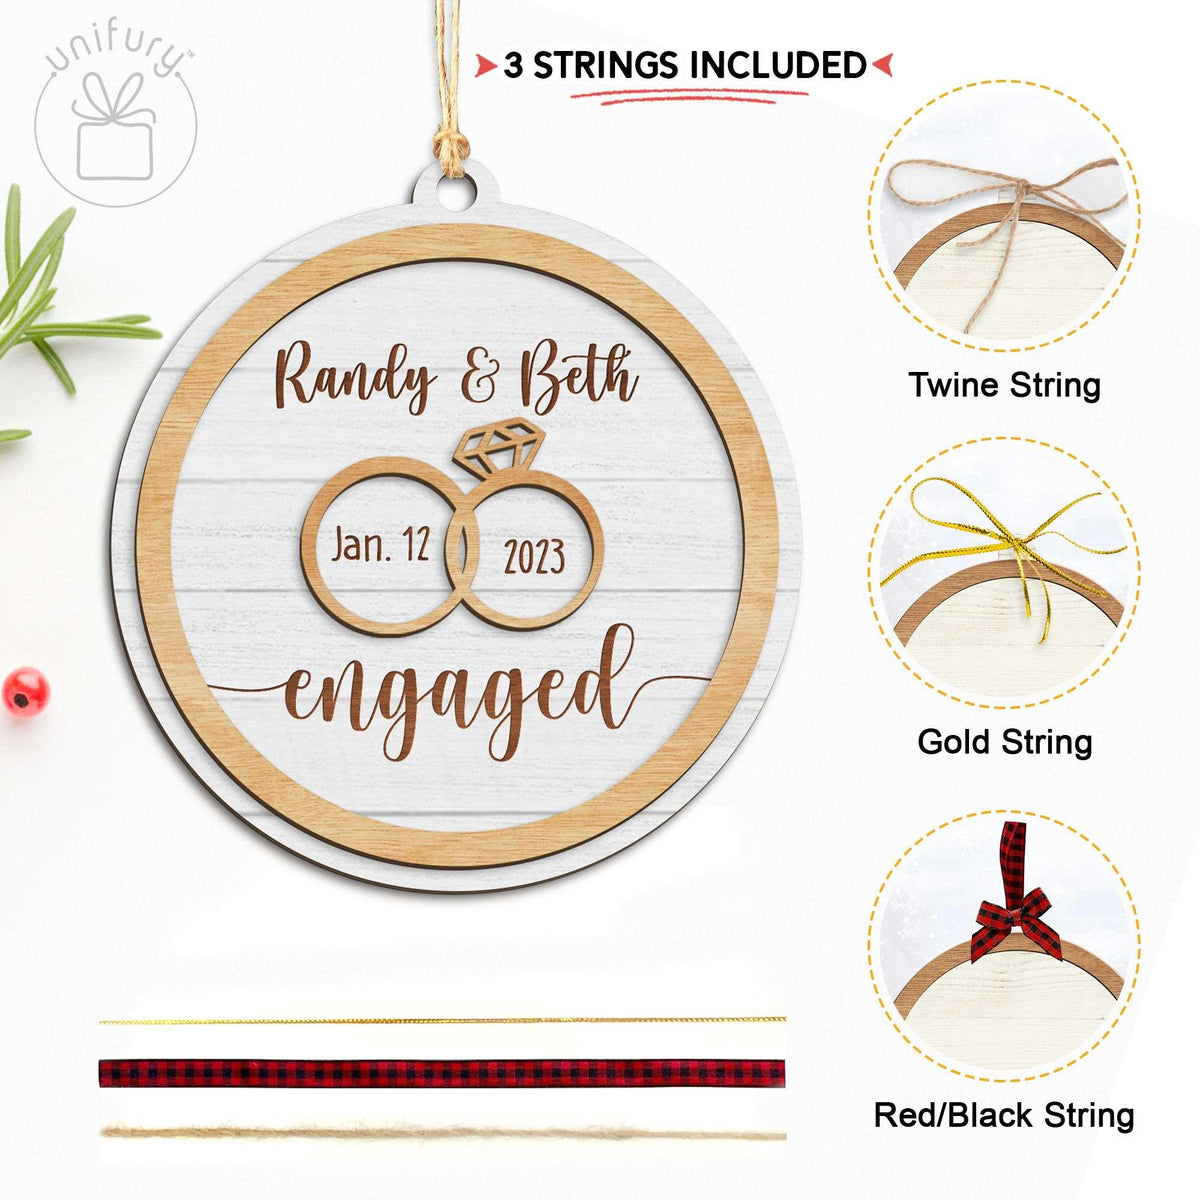 Personalized Basic Color Engagement Ring Wooden Ornament